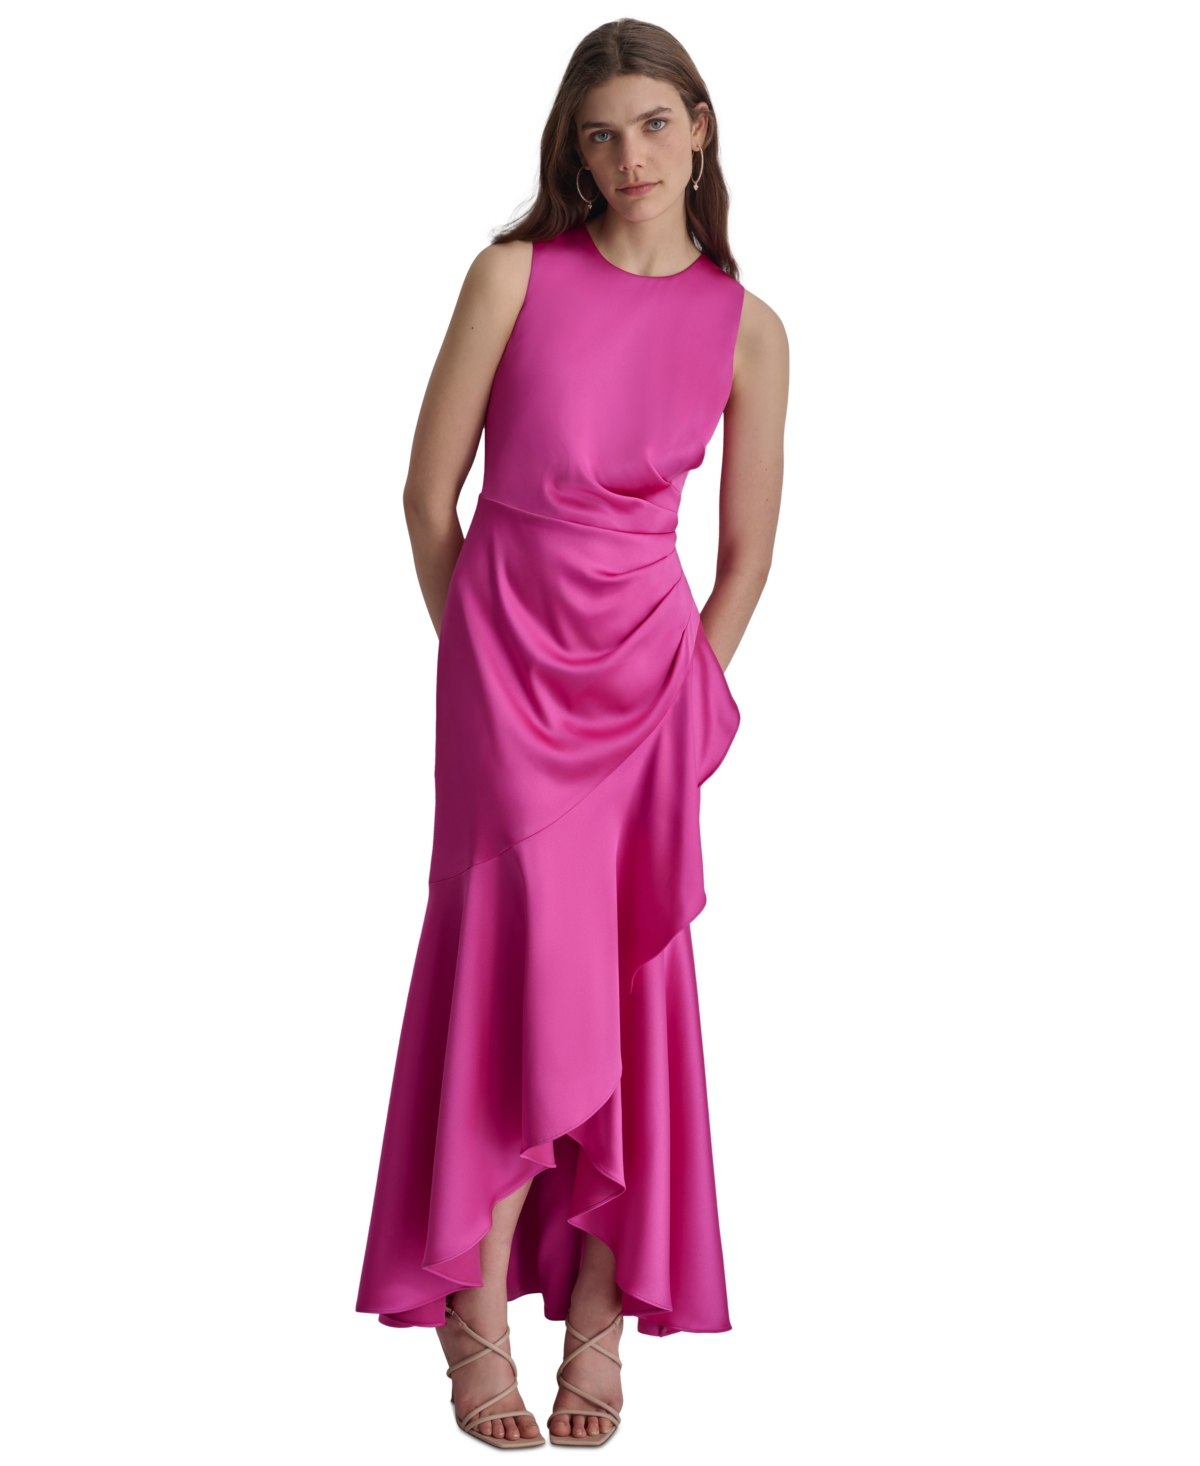 Women's Satin Ruched Ruffled Gown - Power Pink